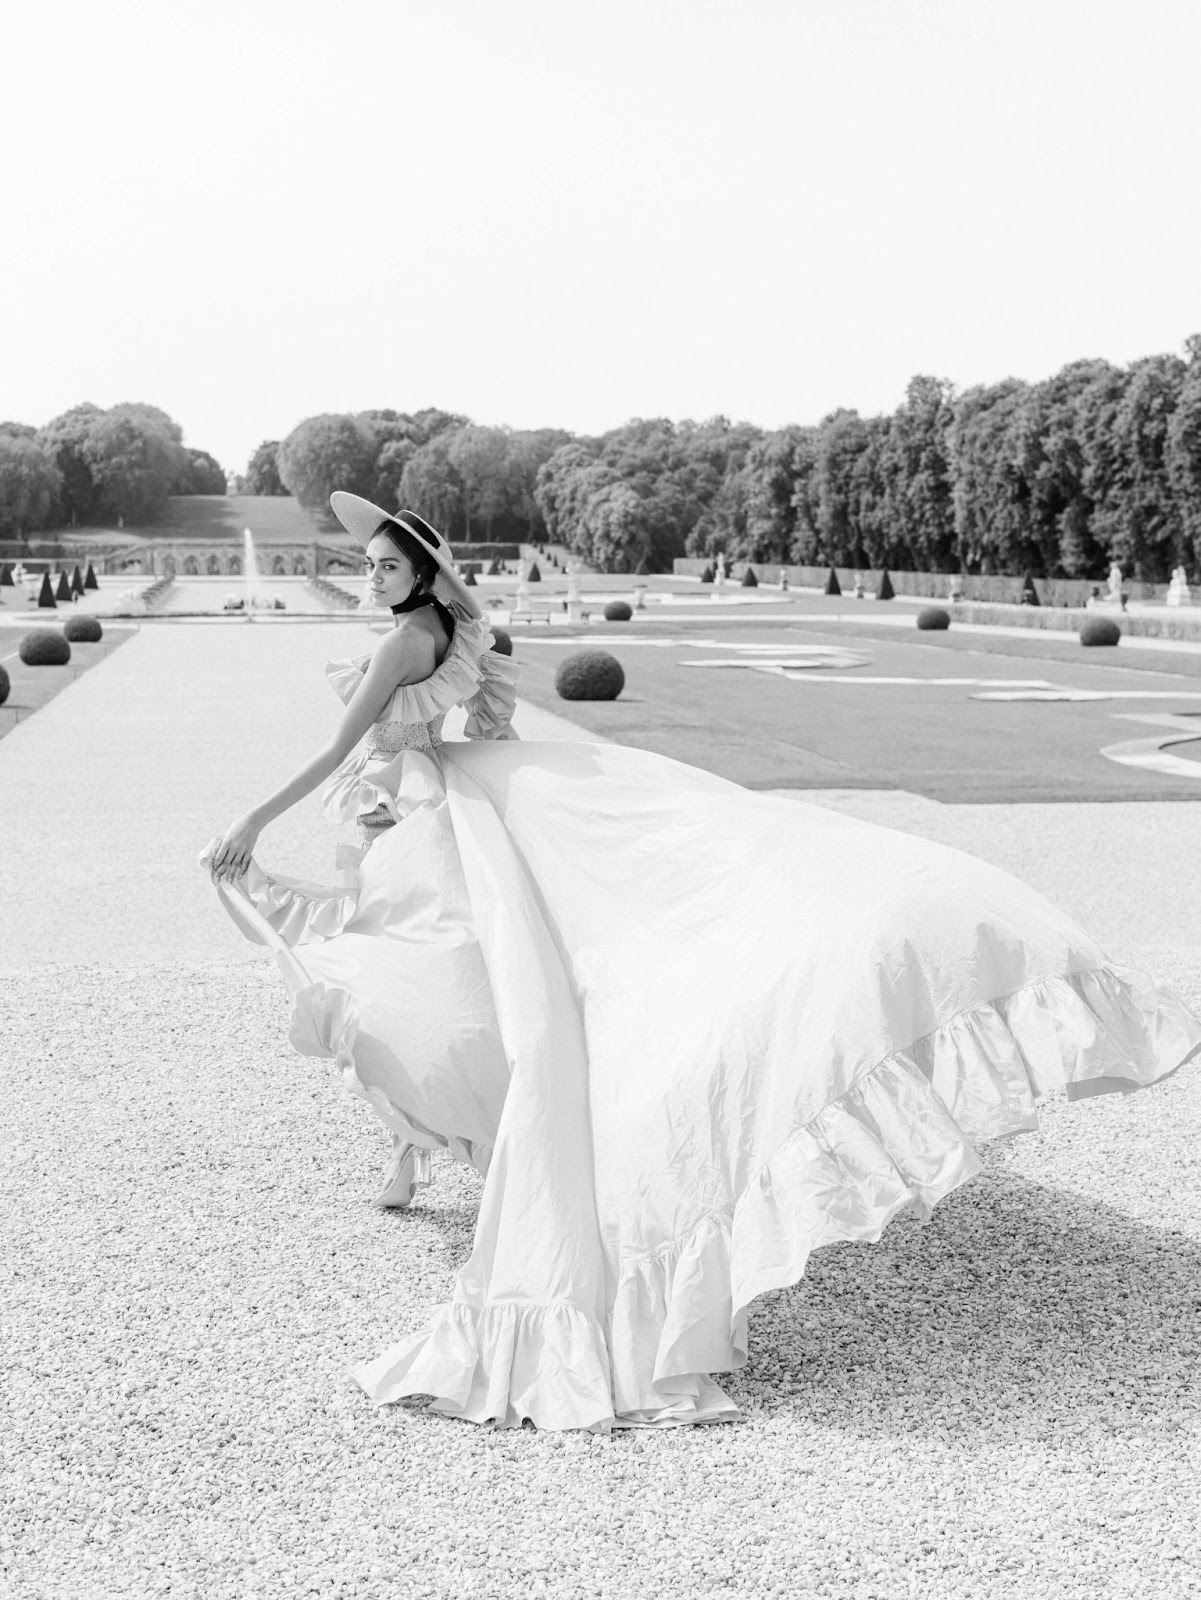 KT Merry bridal couture editorial photo shoot in Paris